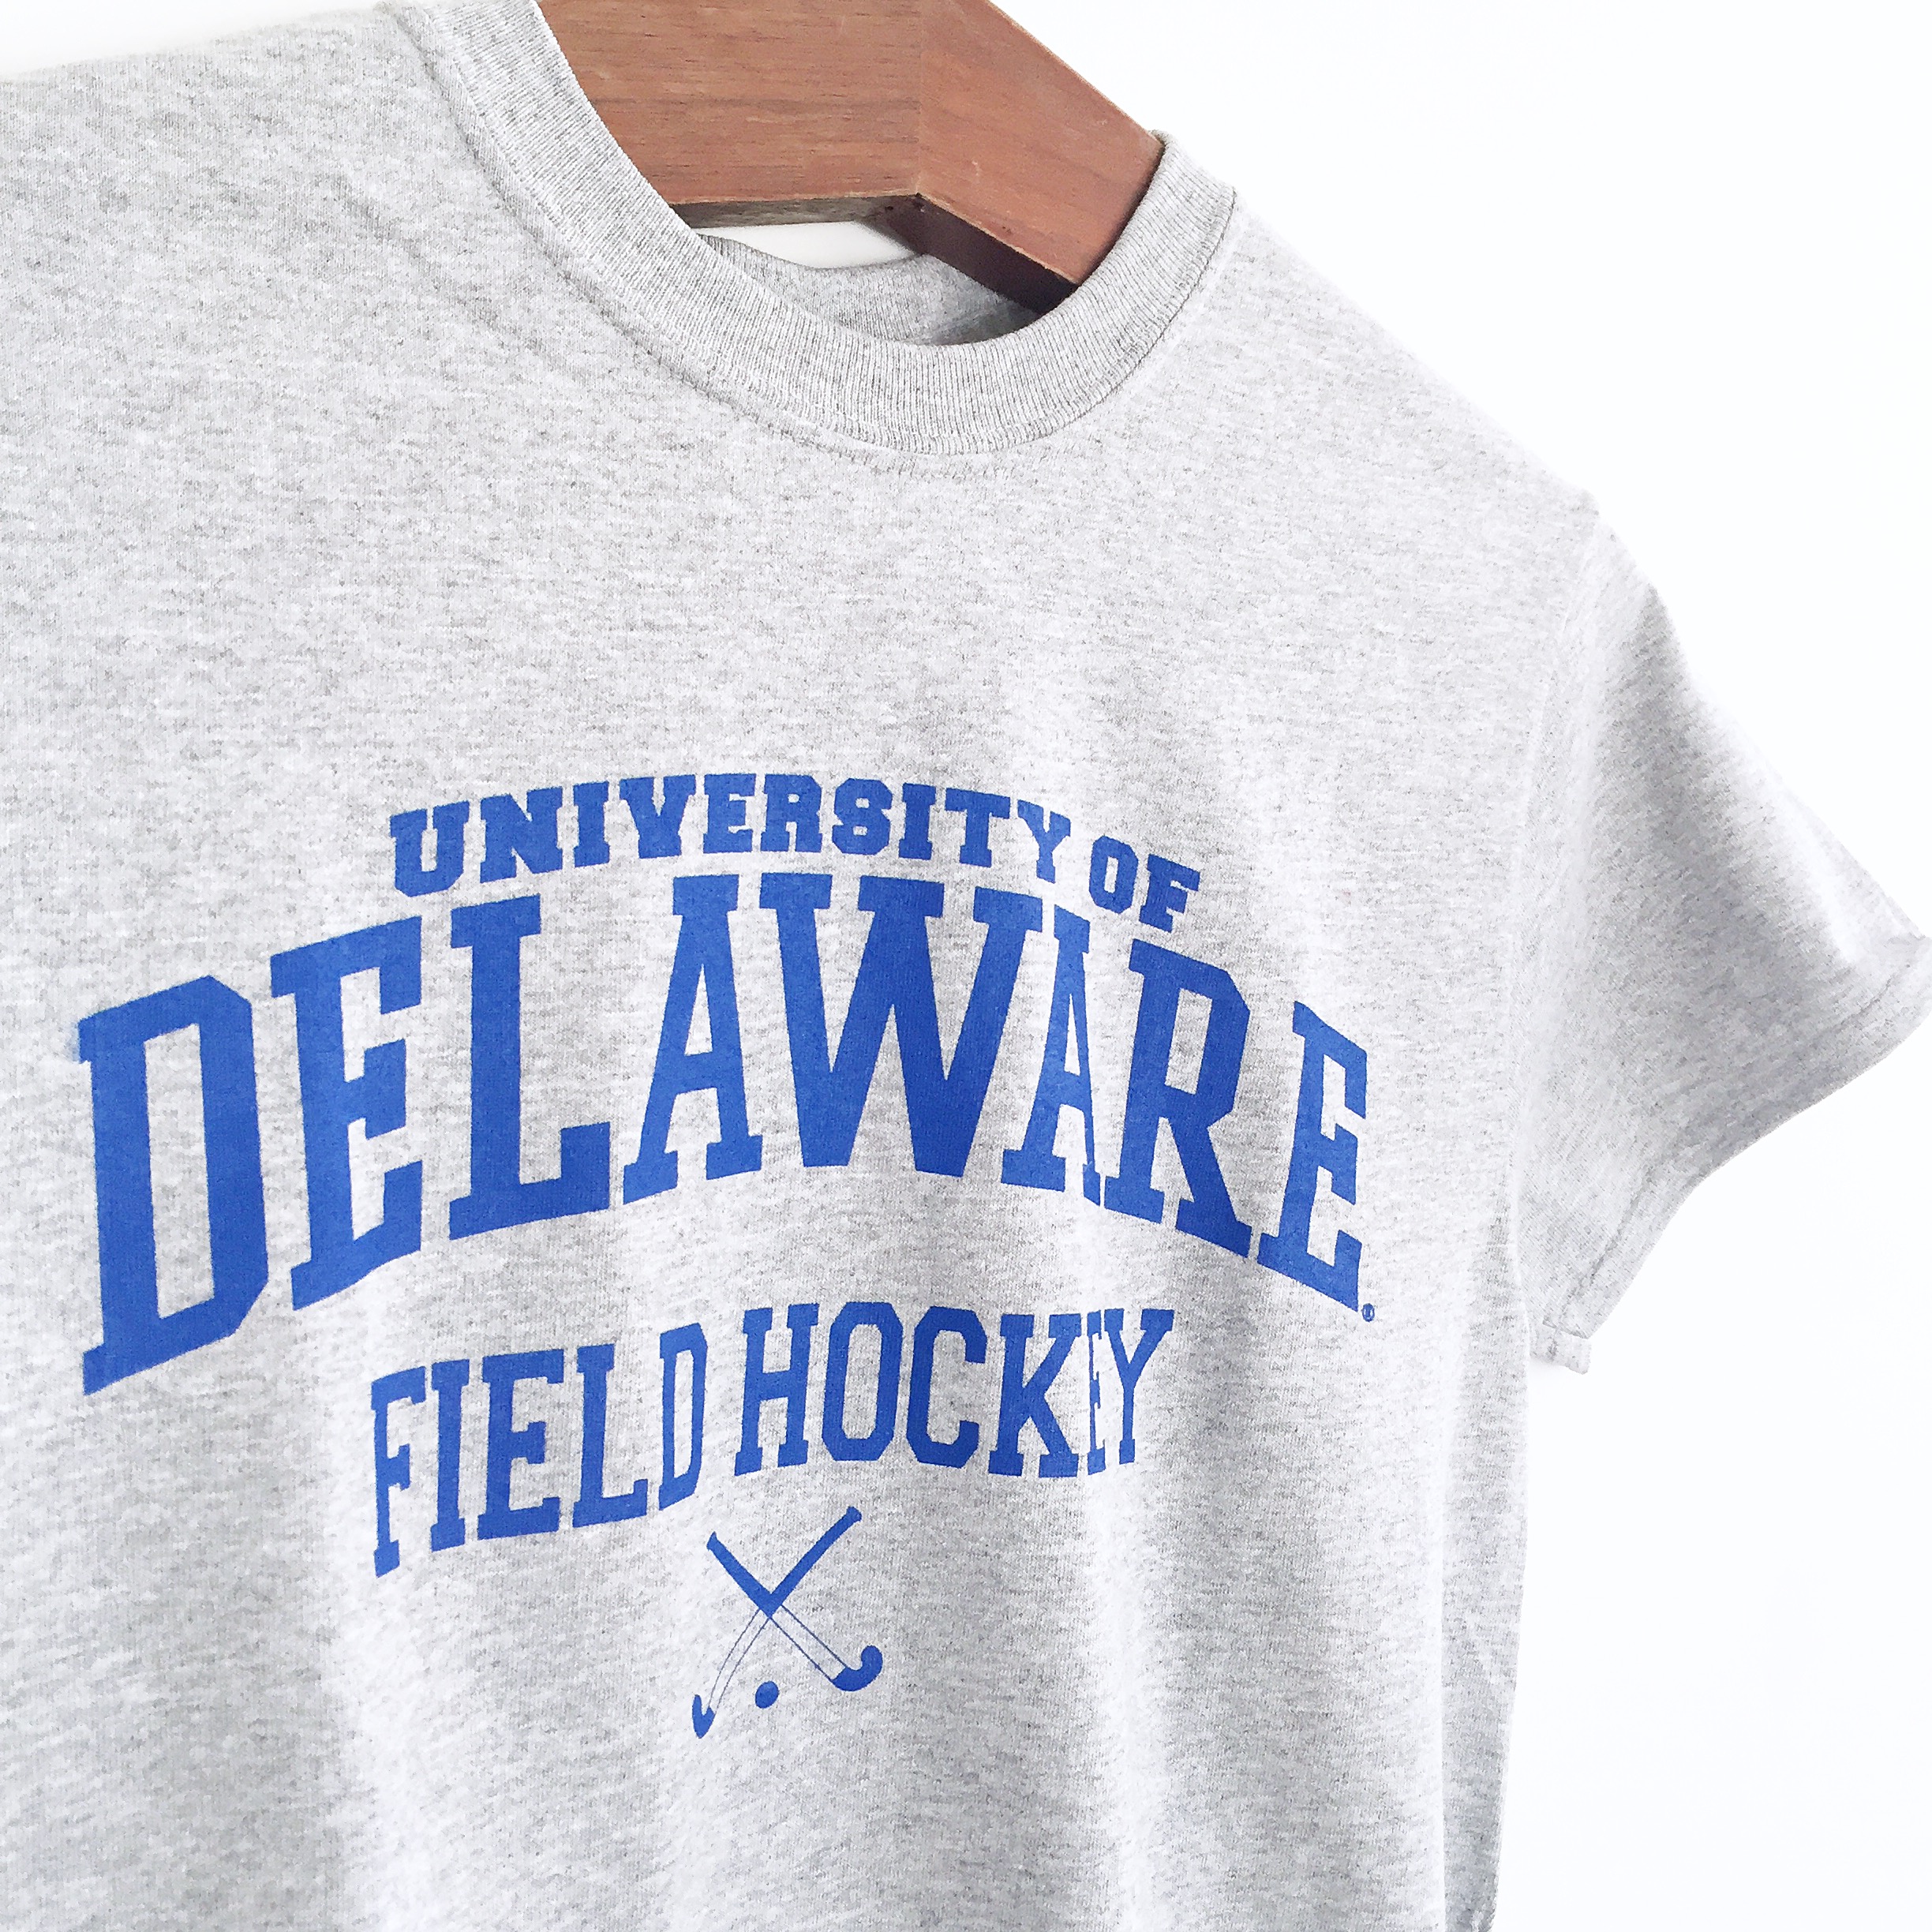 University of Delaware Field Hockey T-shirt – Oxford – National 5 and 10